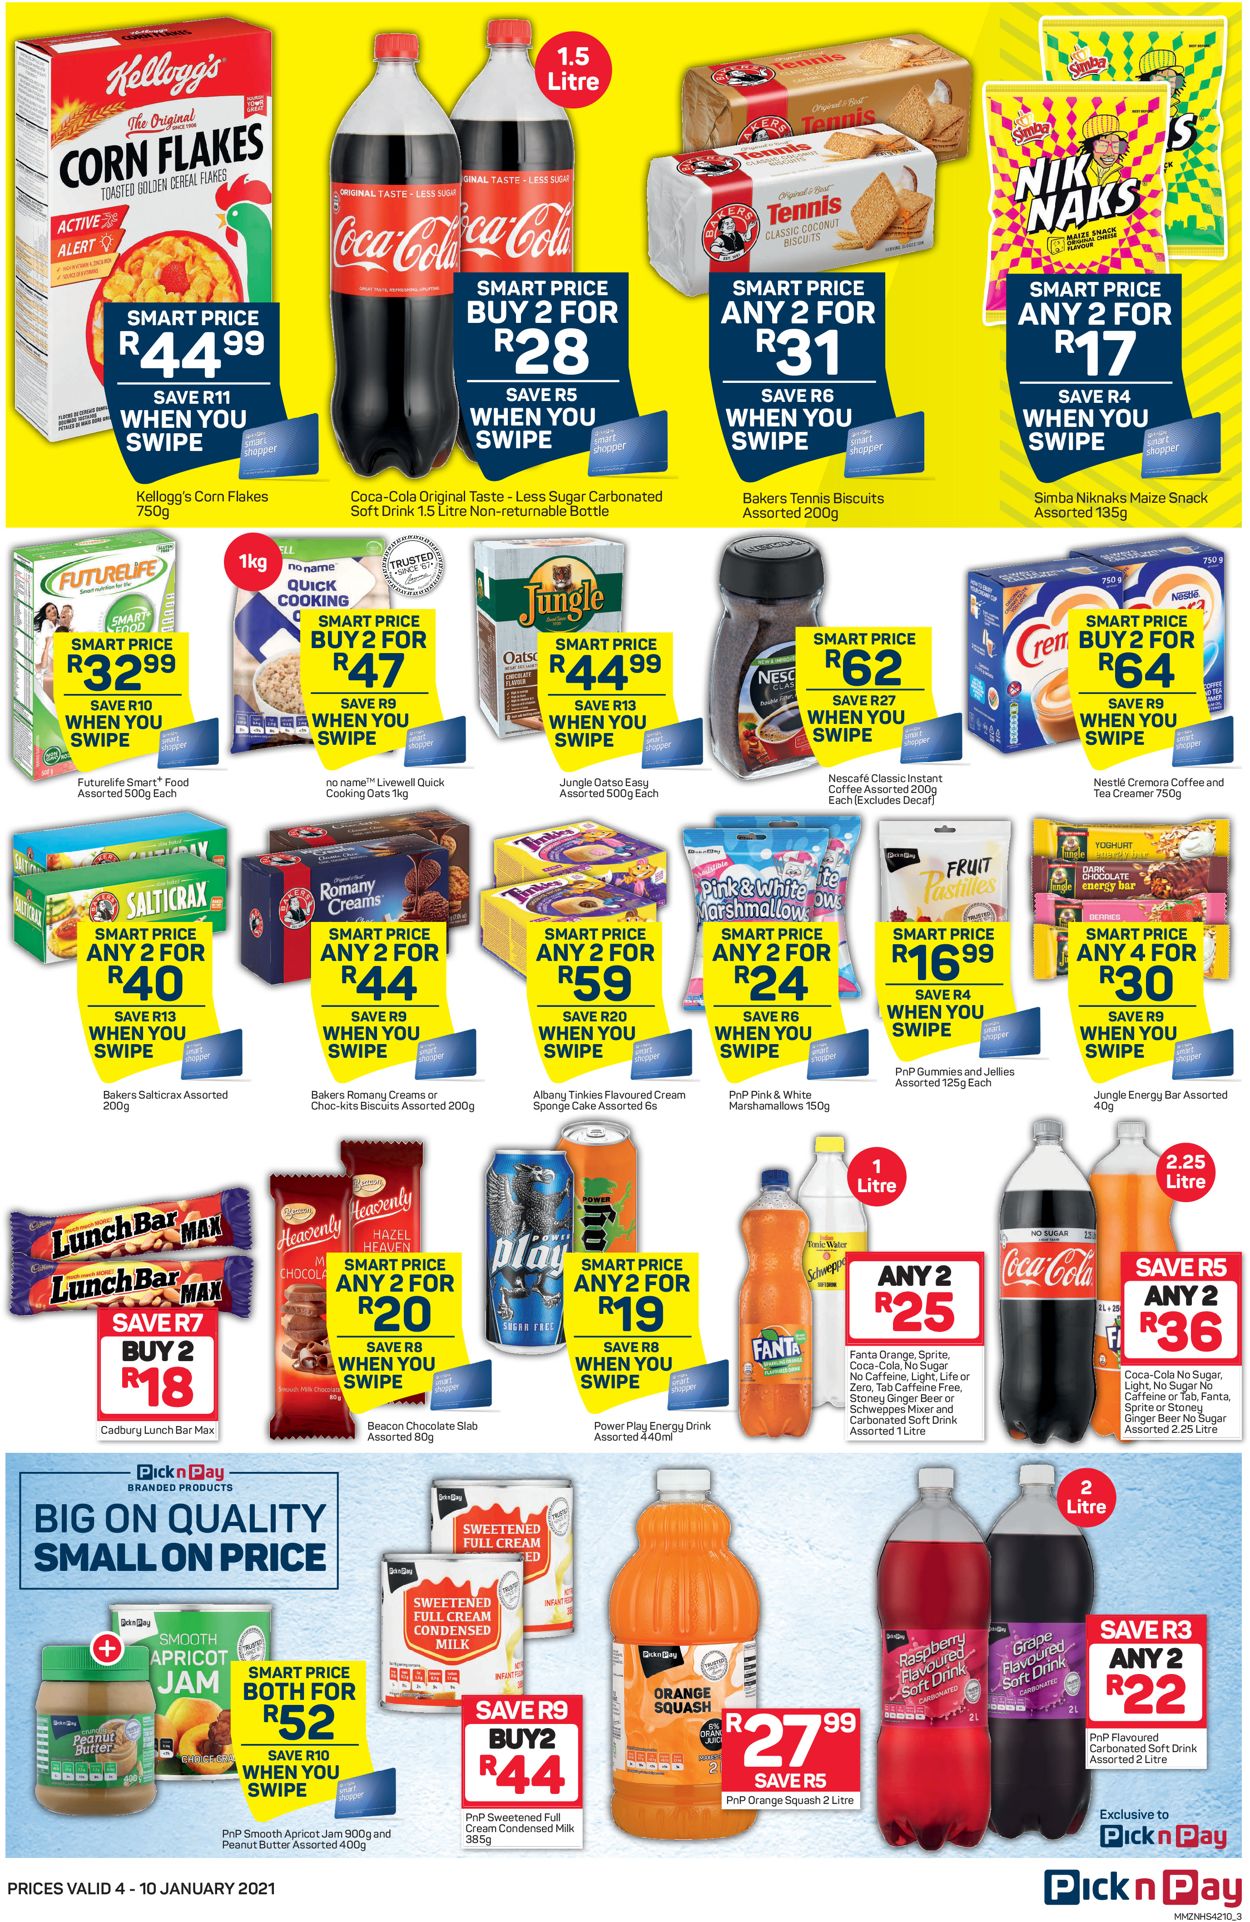 Pick n Pay Smart Price 2021 Catalogue - 2021/01/04-2021/01/10 (Page 3)